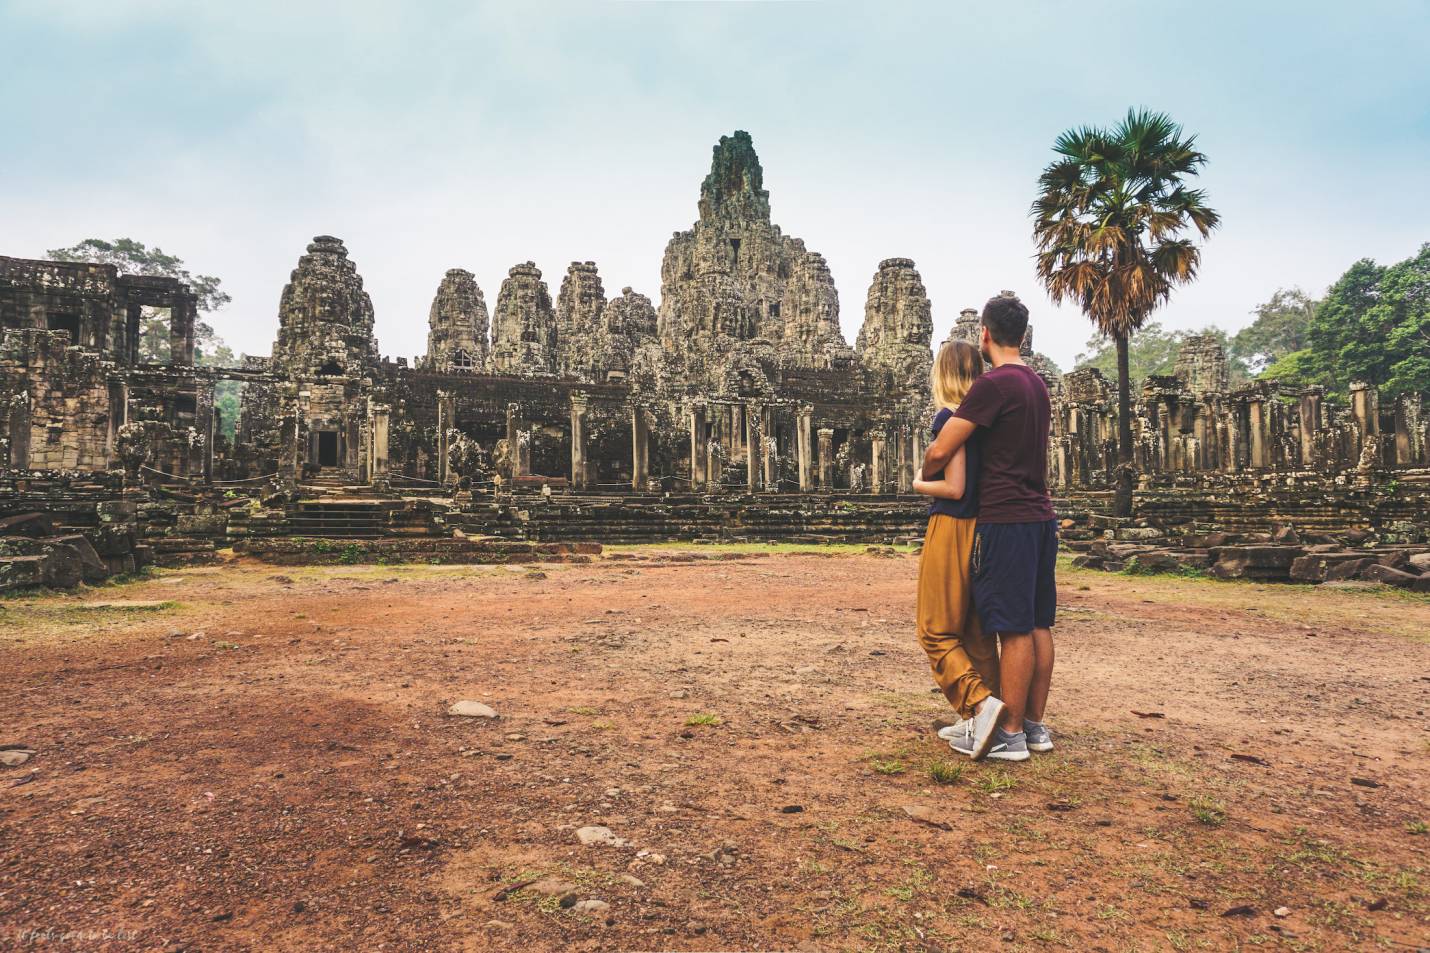 Iga and Rafa in front of an Angkor Wat temple